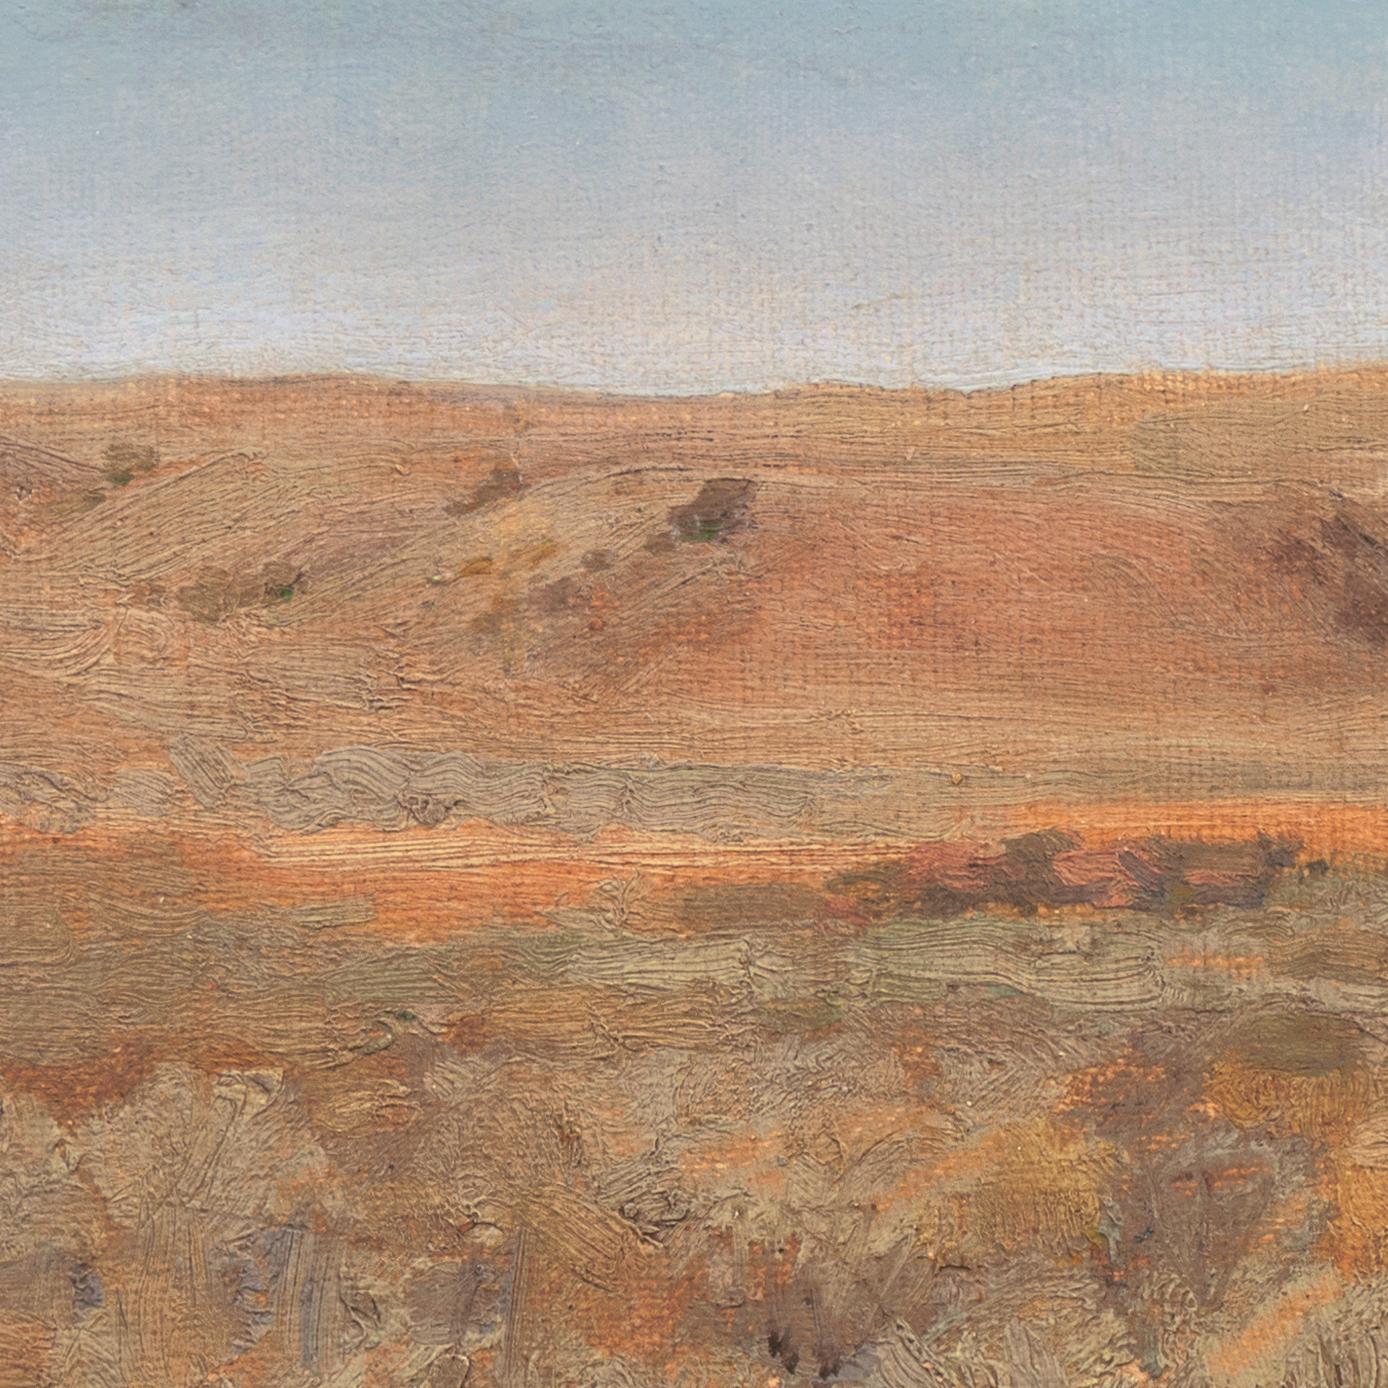 'Montana Hills', Academy of Arts, Berlin, National Academy of Design  - Brown Landscape Painting by Carl Rungius